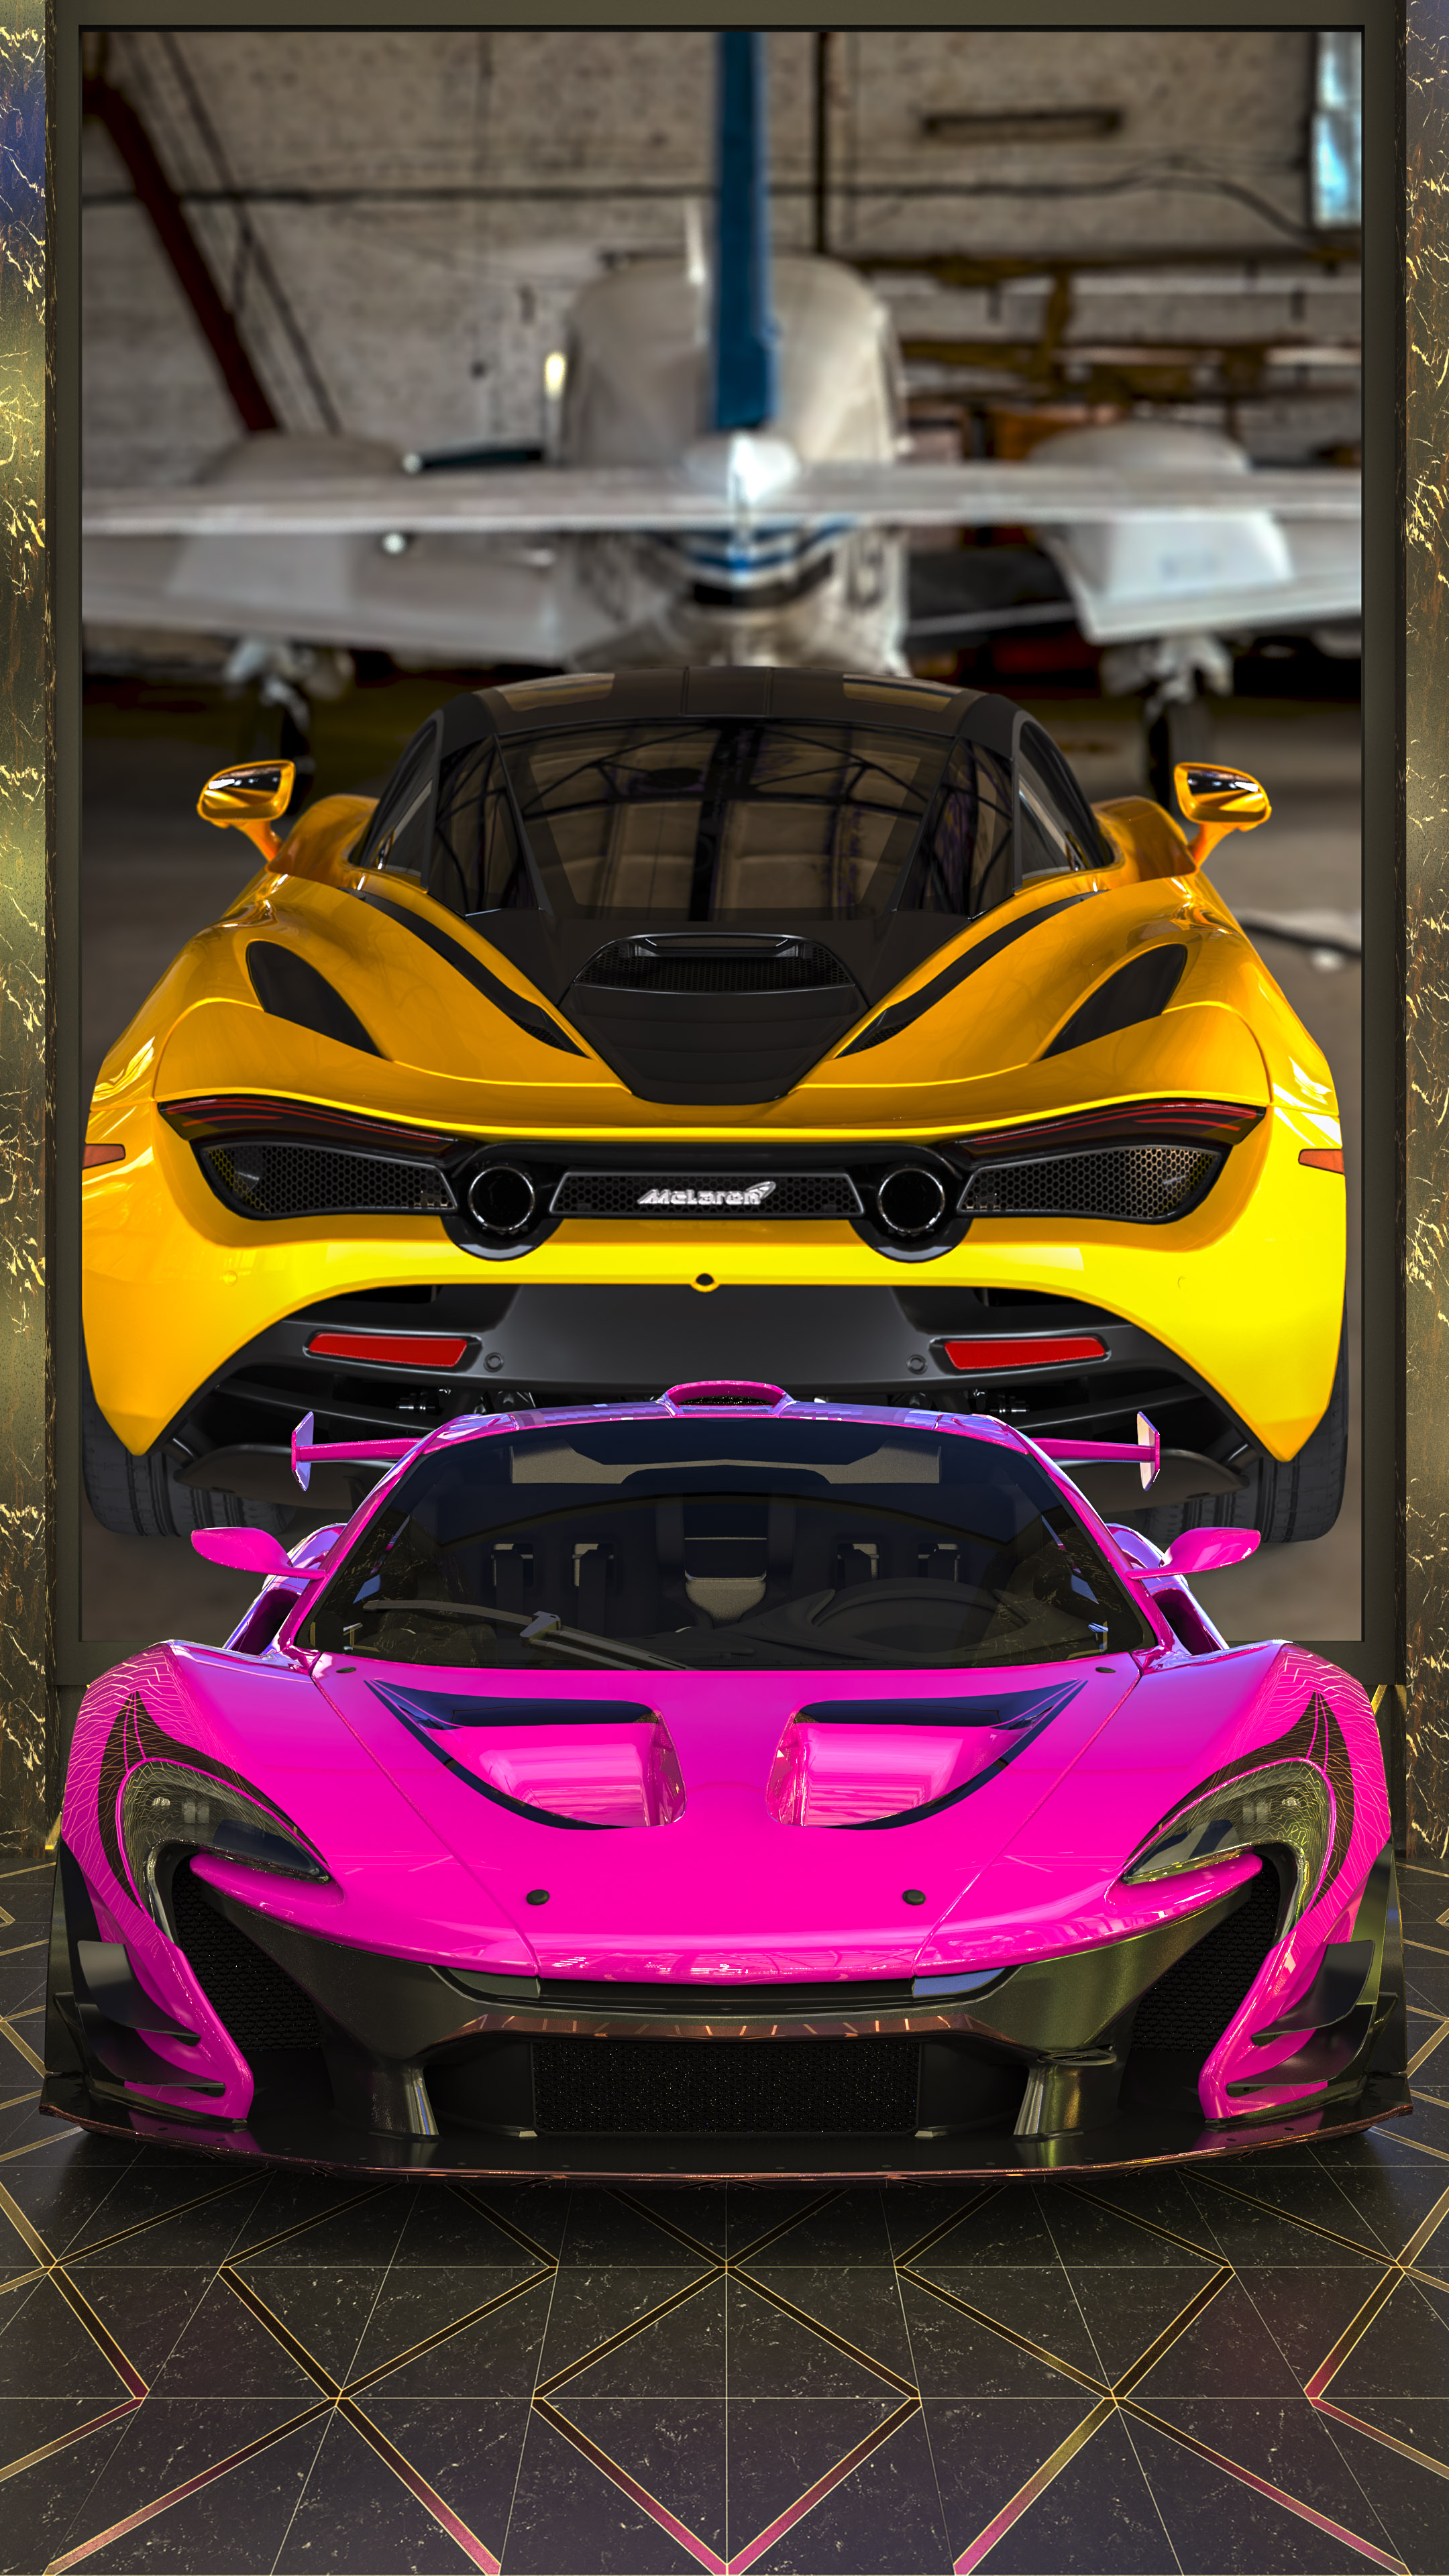 Admire the elegance of the McLaren P1 GTR with our cool car wallpaper for iPhone, designed to enhance your device’s appeal.